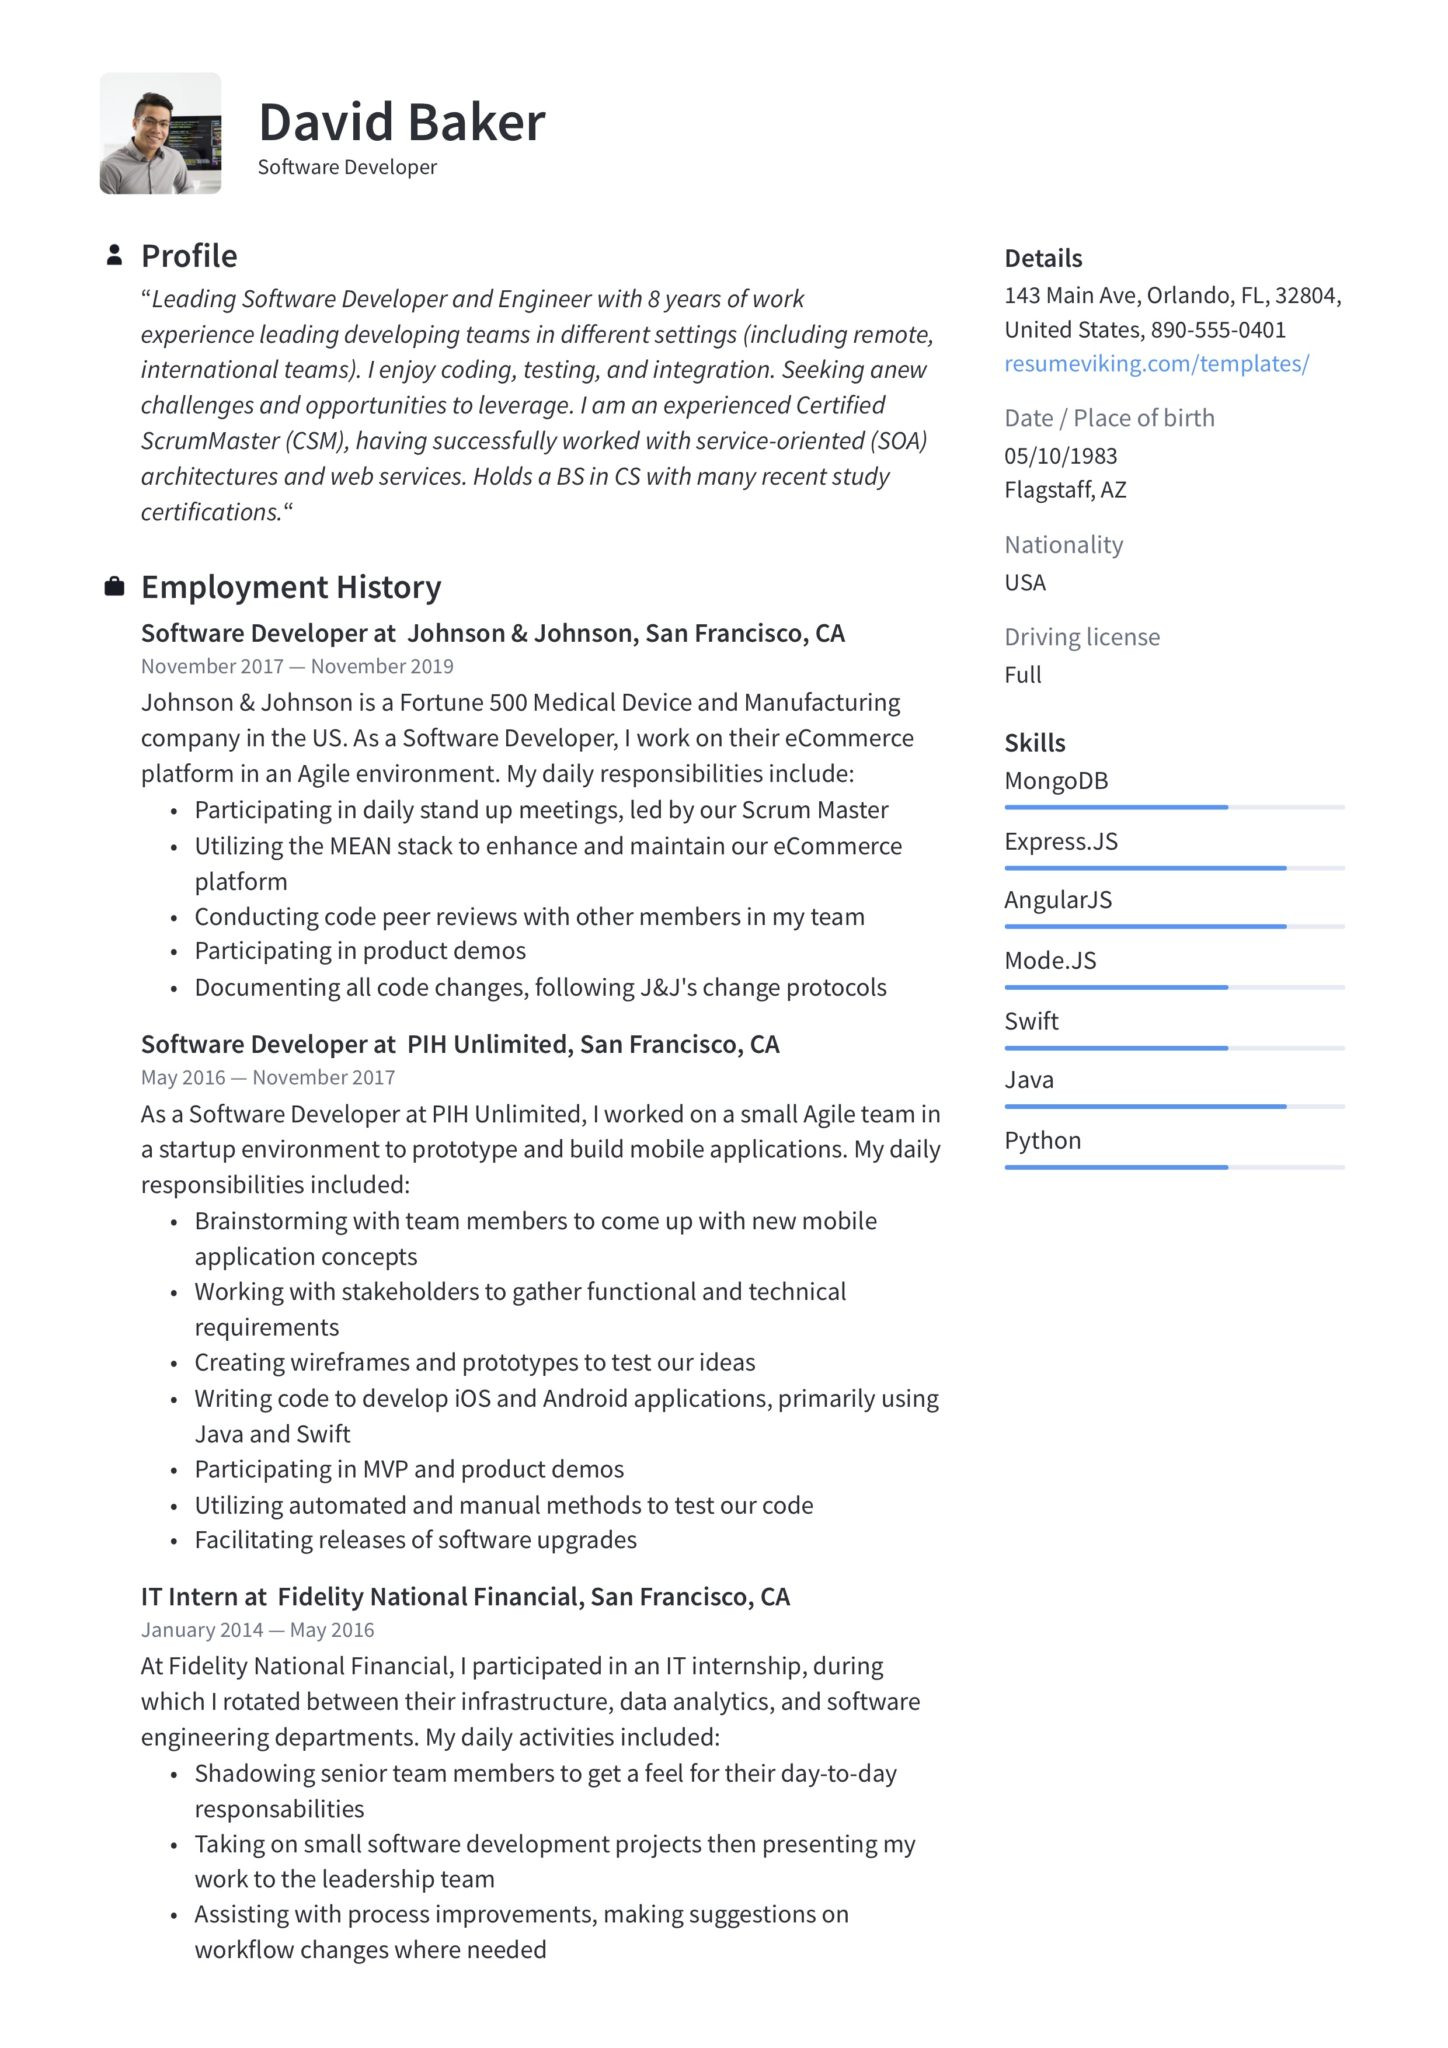 Experienced software Engineer Resume Template Free Download Guide: software Developer Resume  19 Examples Word & Pdf 2020